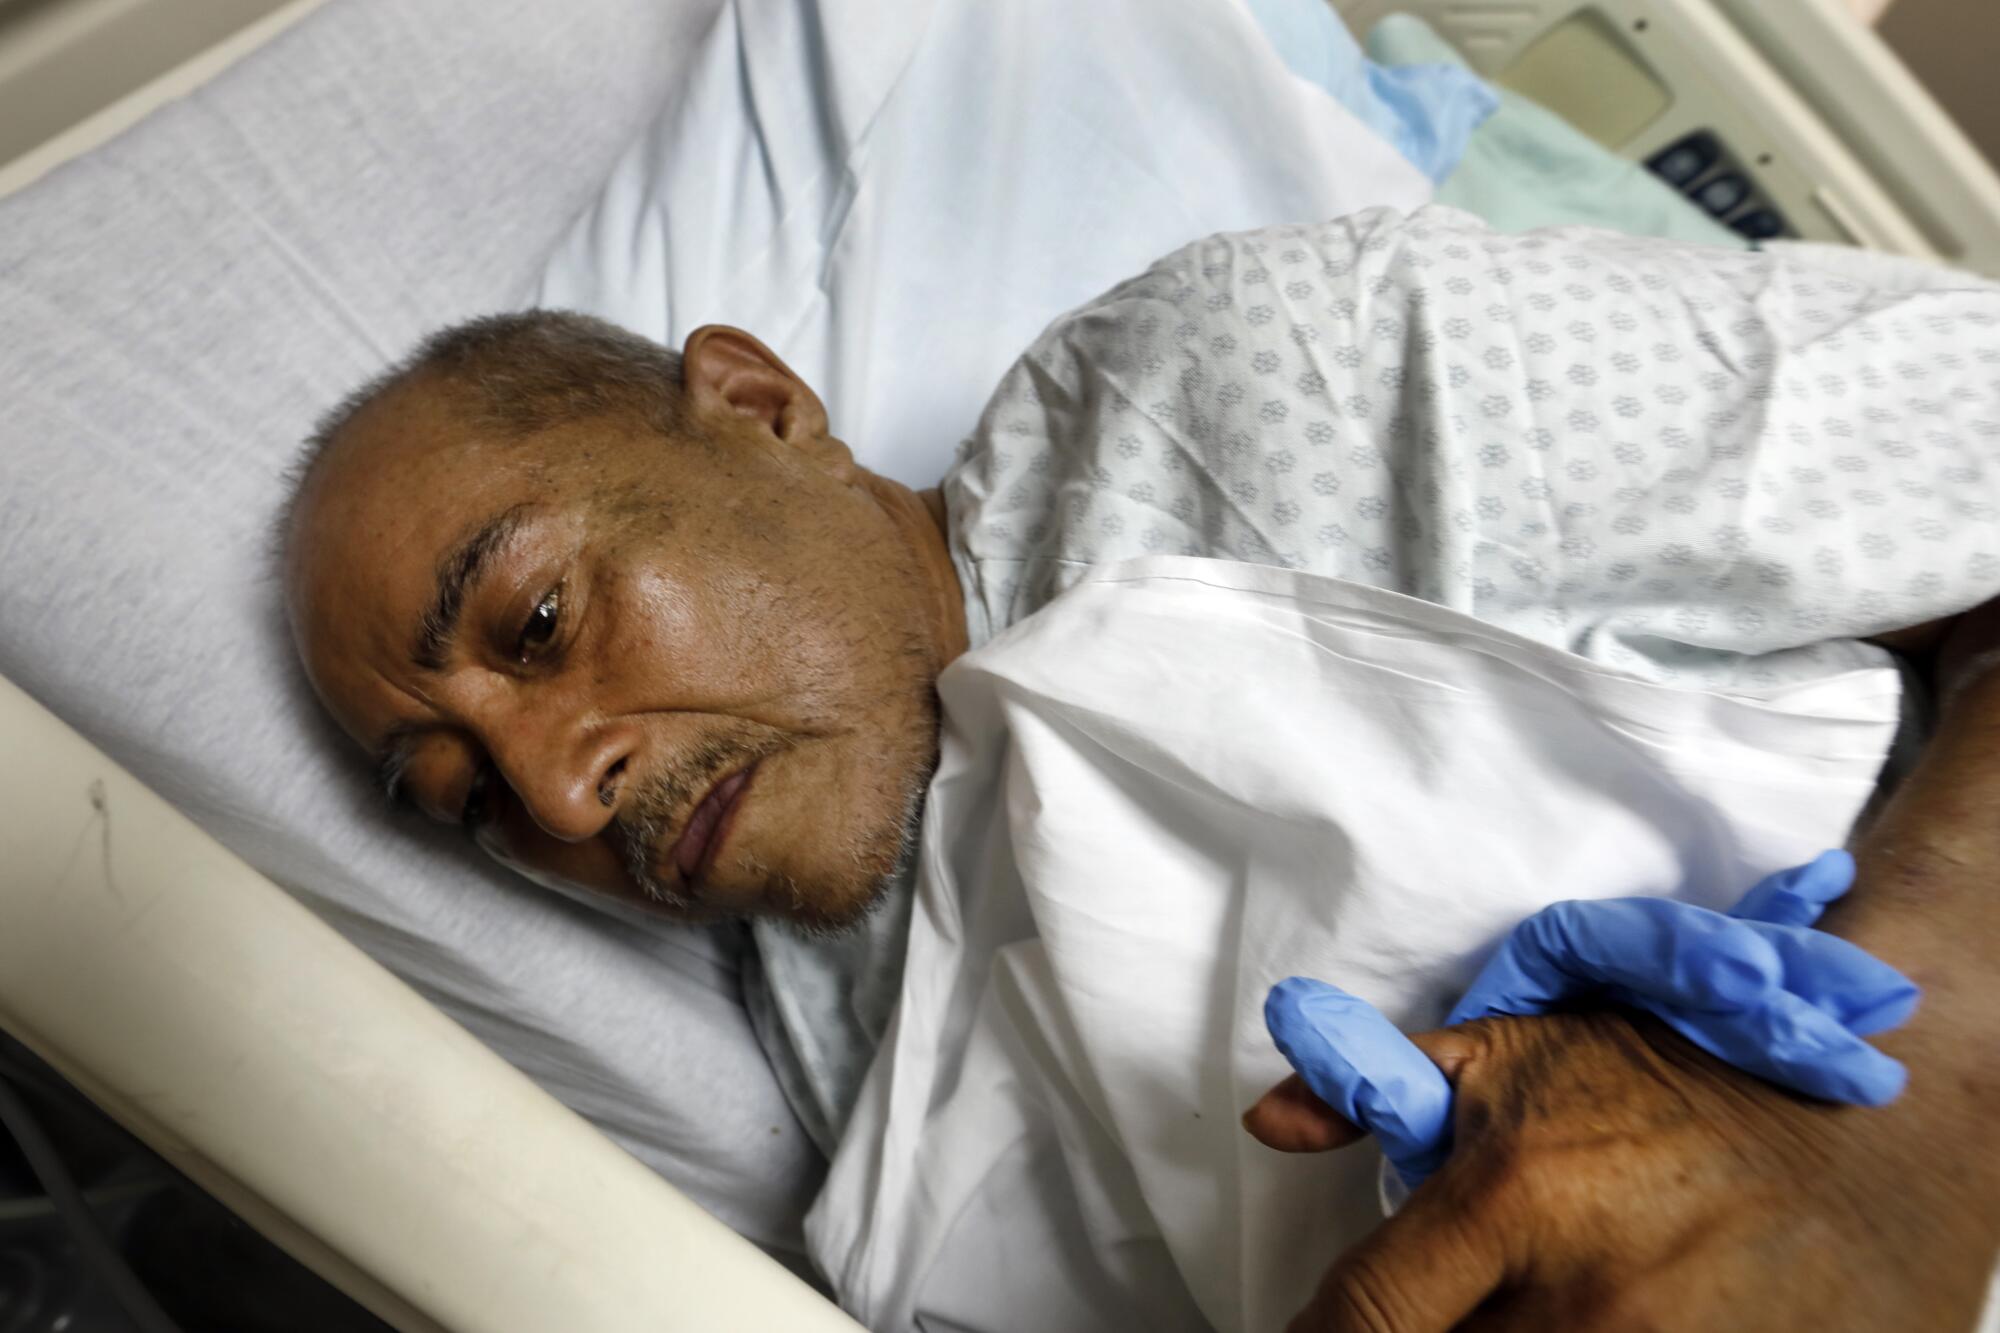 Luis Florez, 59, already suffered from cirrhosis before he contracted COVID-19, putting him at added risk. 